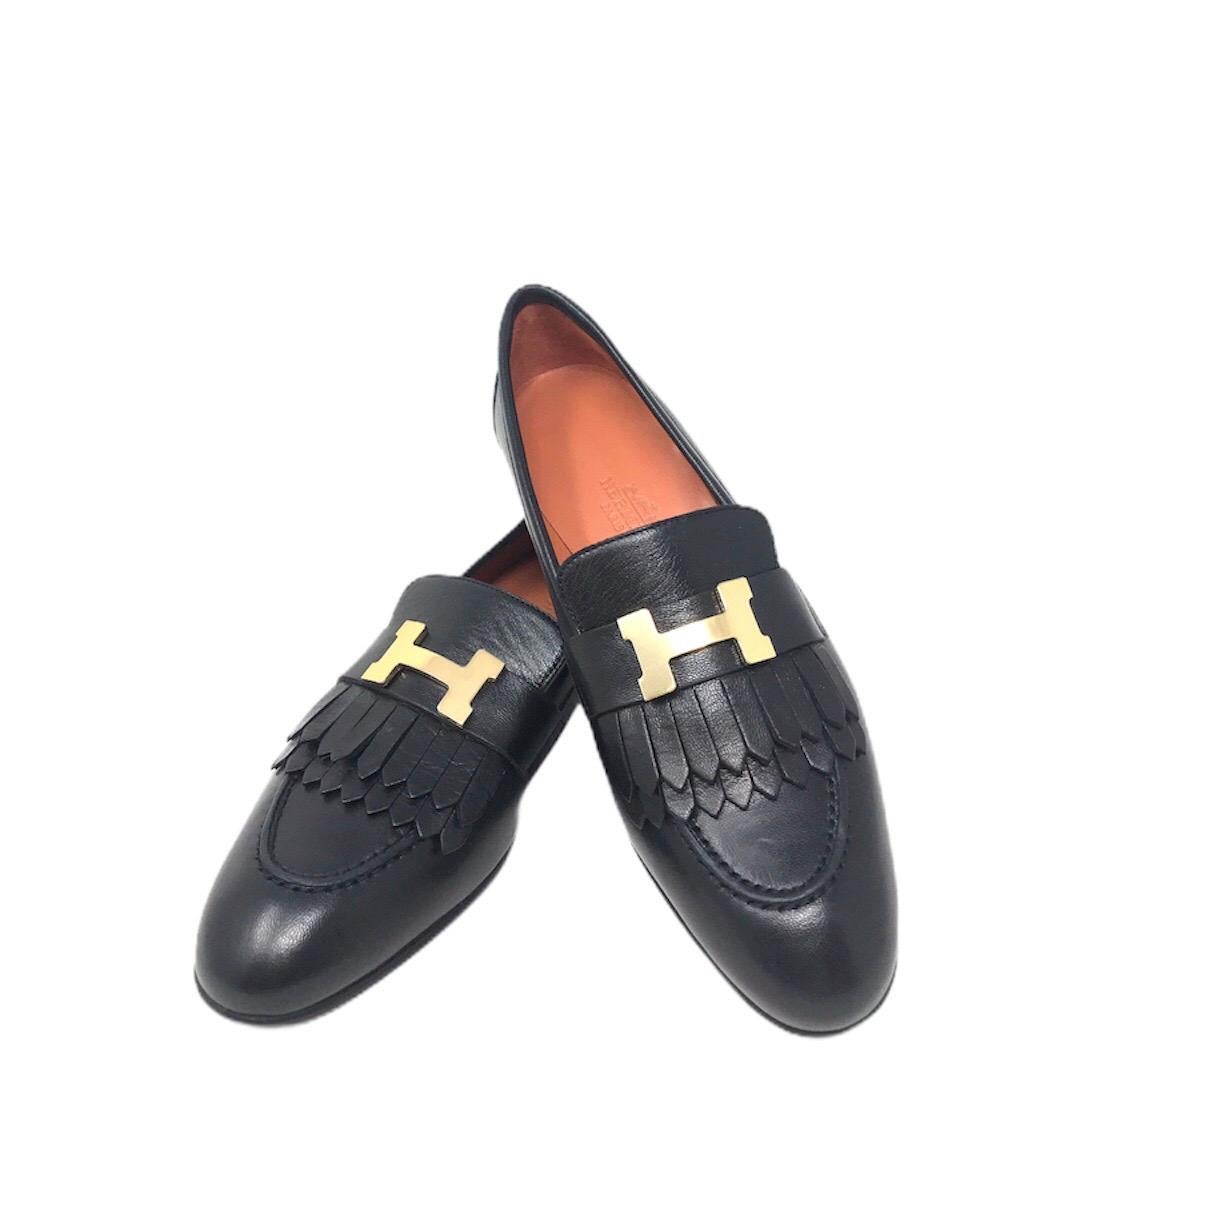 Hermès Paris loafers
Paris model
In kid embellished with a detail in gold metal, Black color
size 35
like new condition with box and dust bag